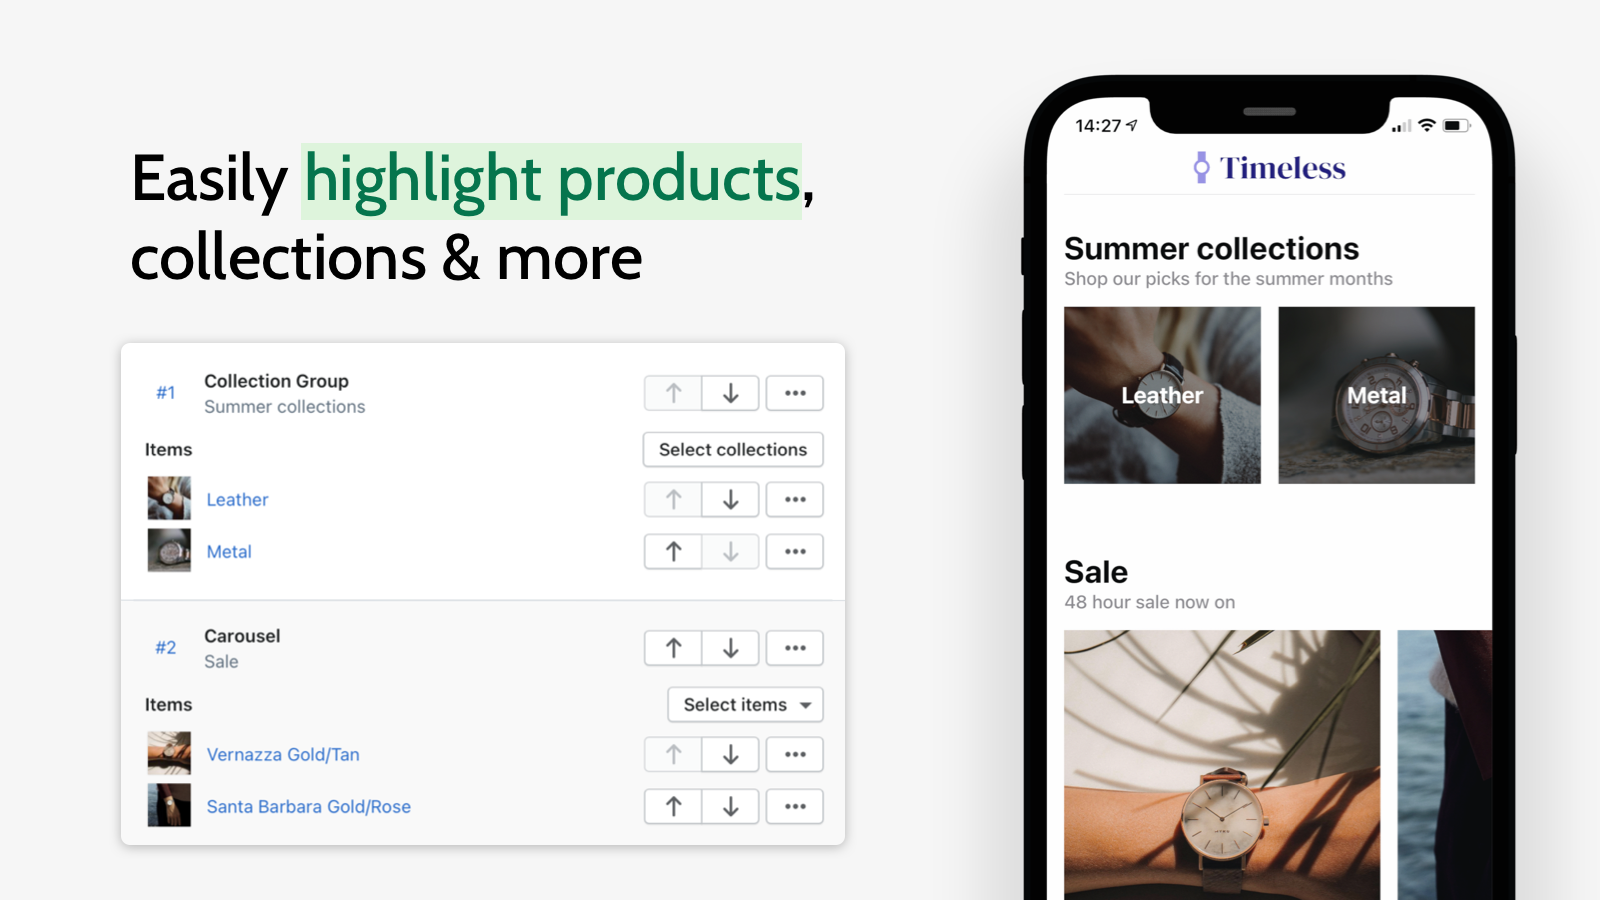 Easily highlight products, collections & more